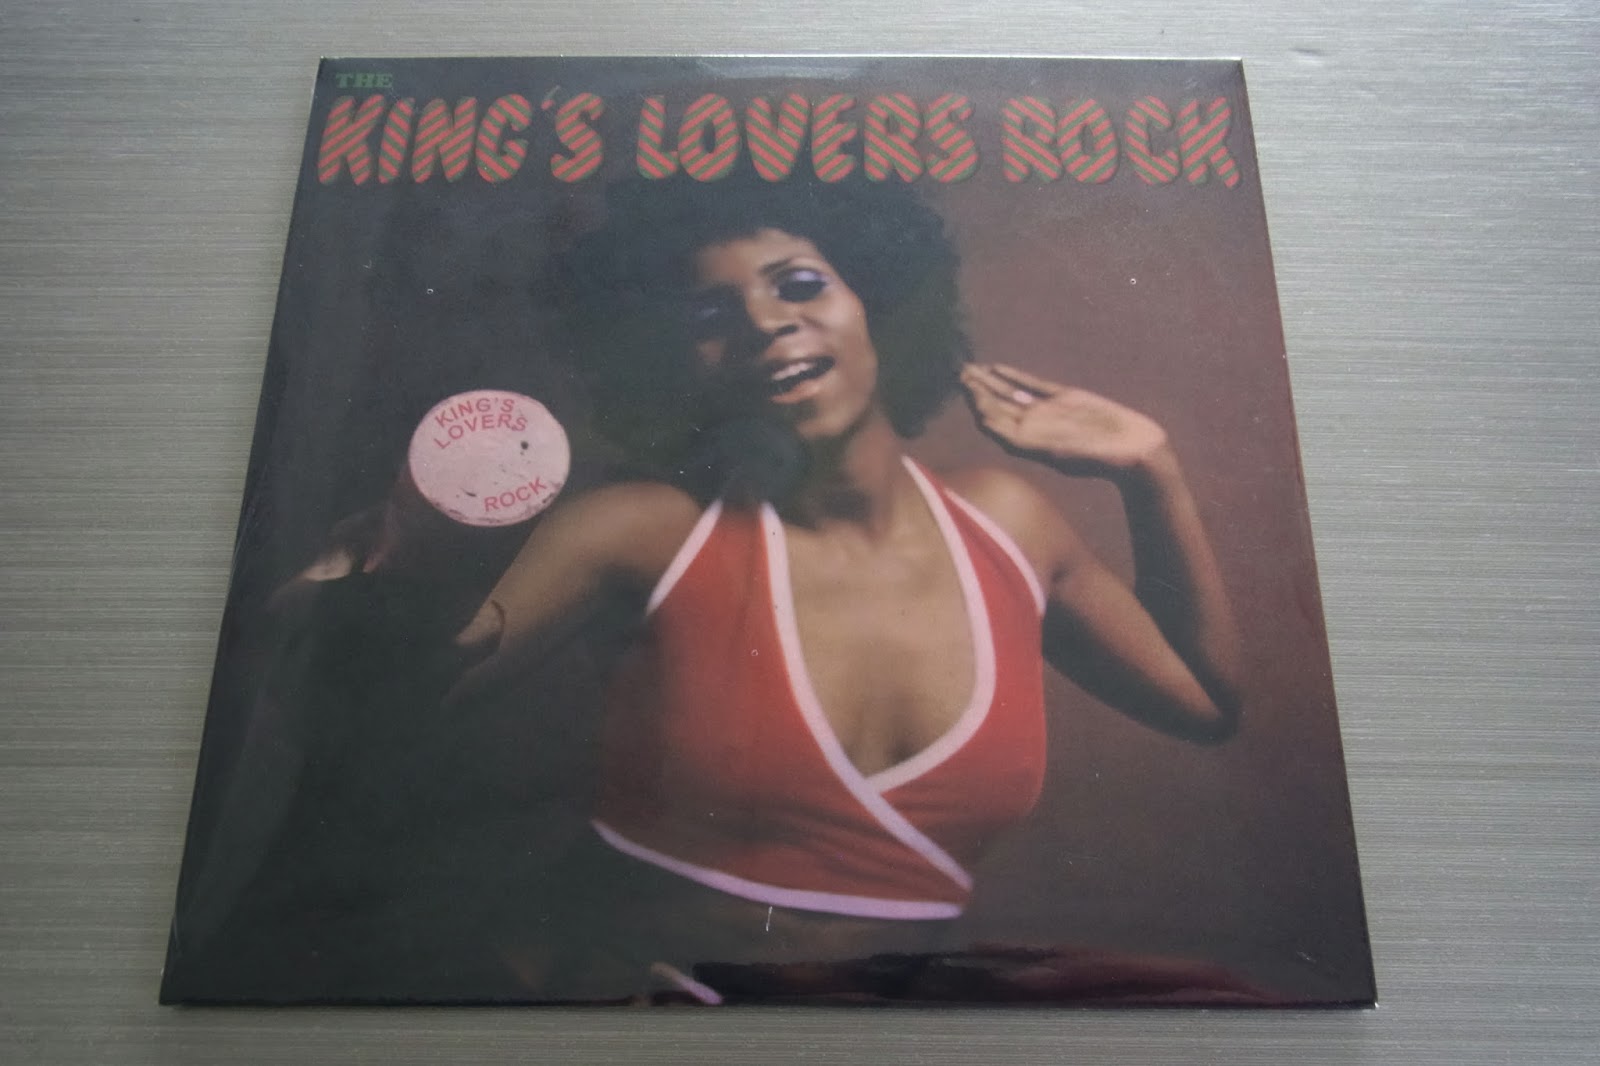 =spinners=: The KING’S LOVERS ROCK -MIX BY DJ MURO-